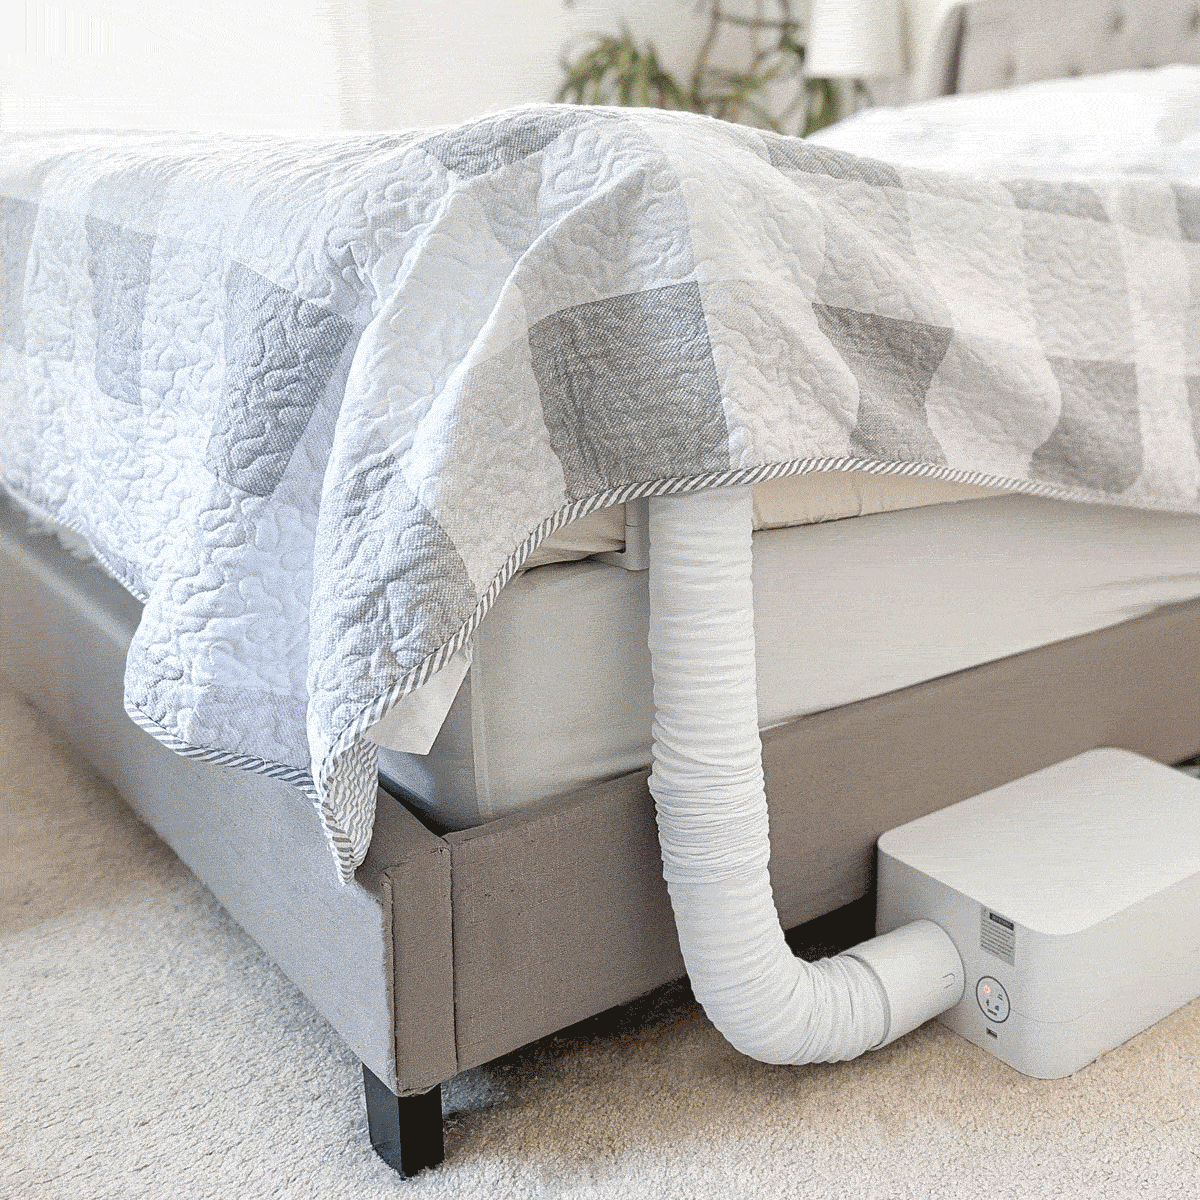 We Tested The 7 Best Bed Cooling Systems For More Comfortable Sleep